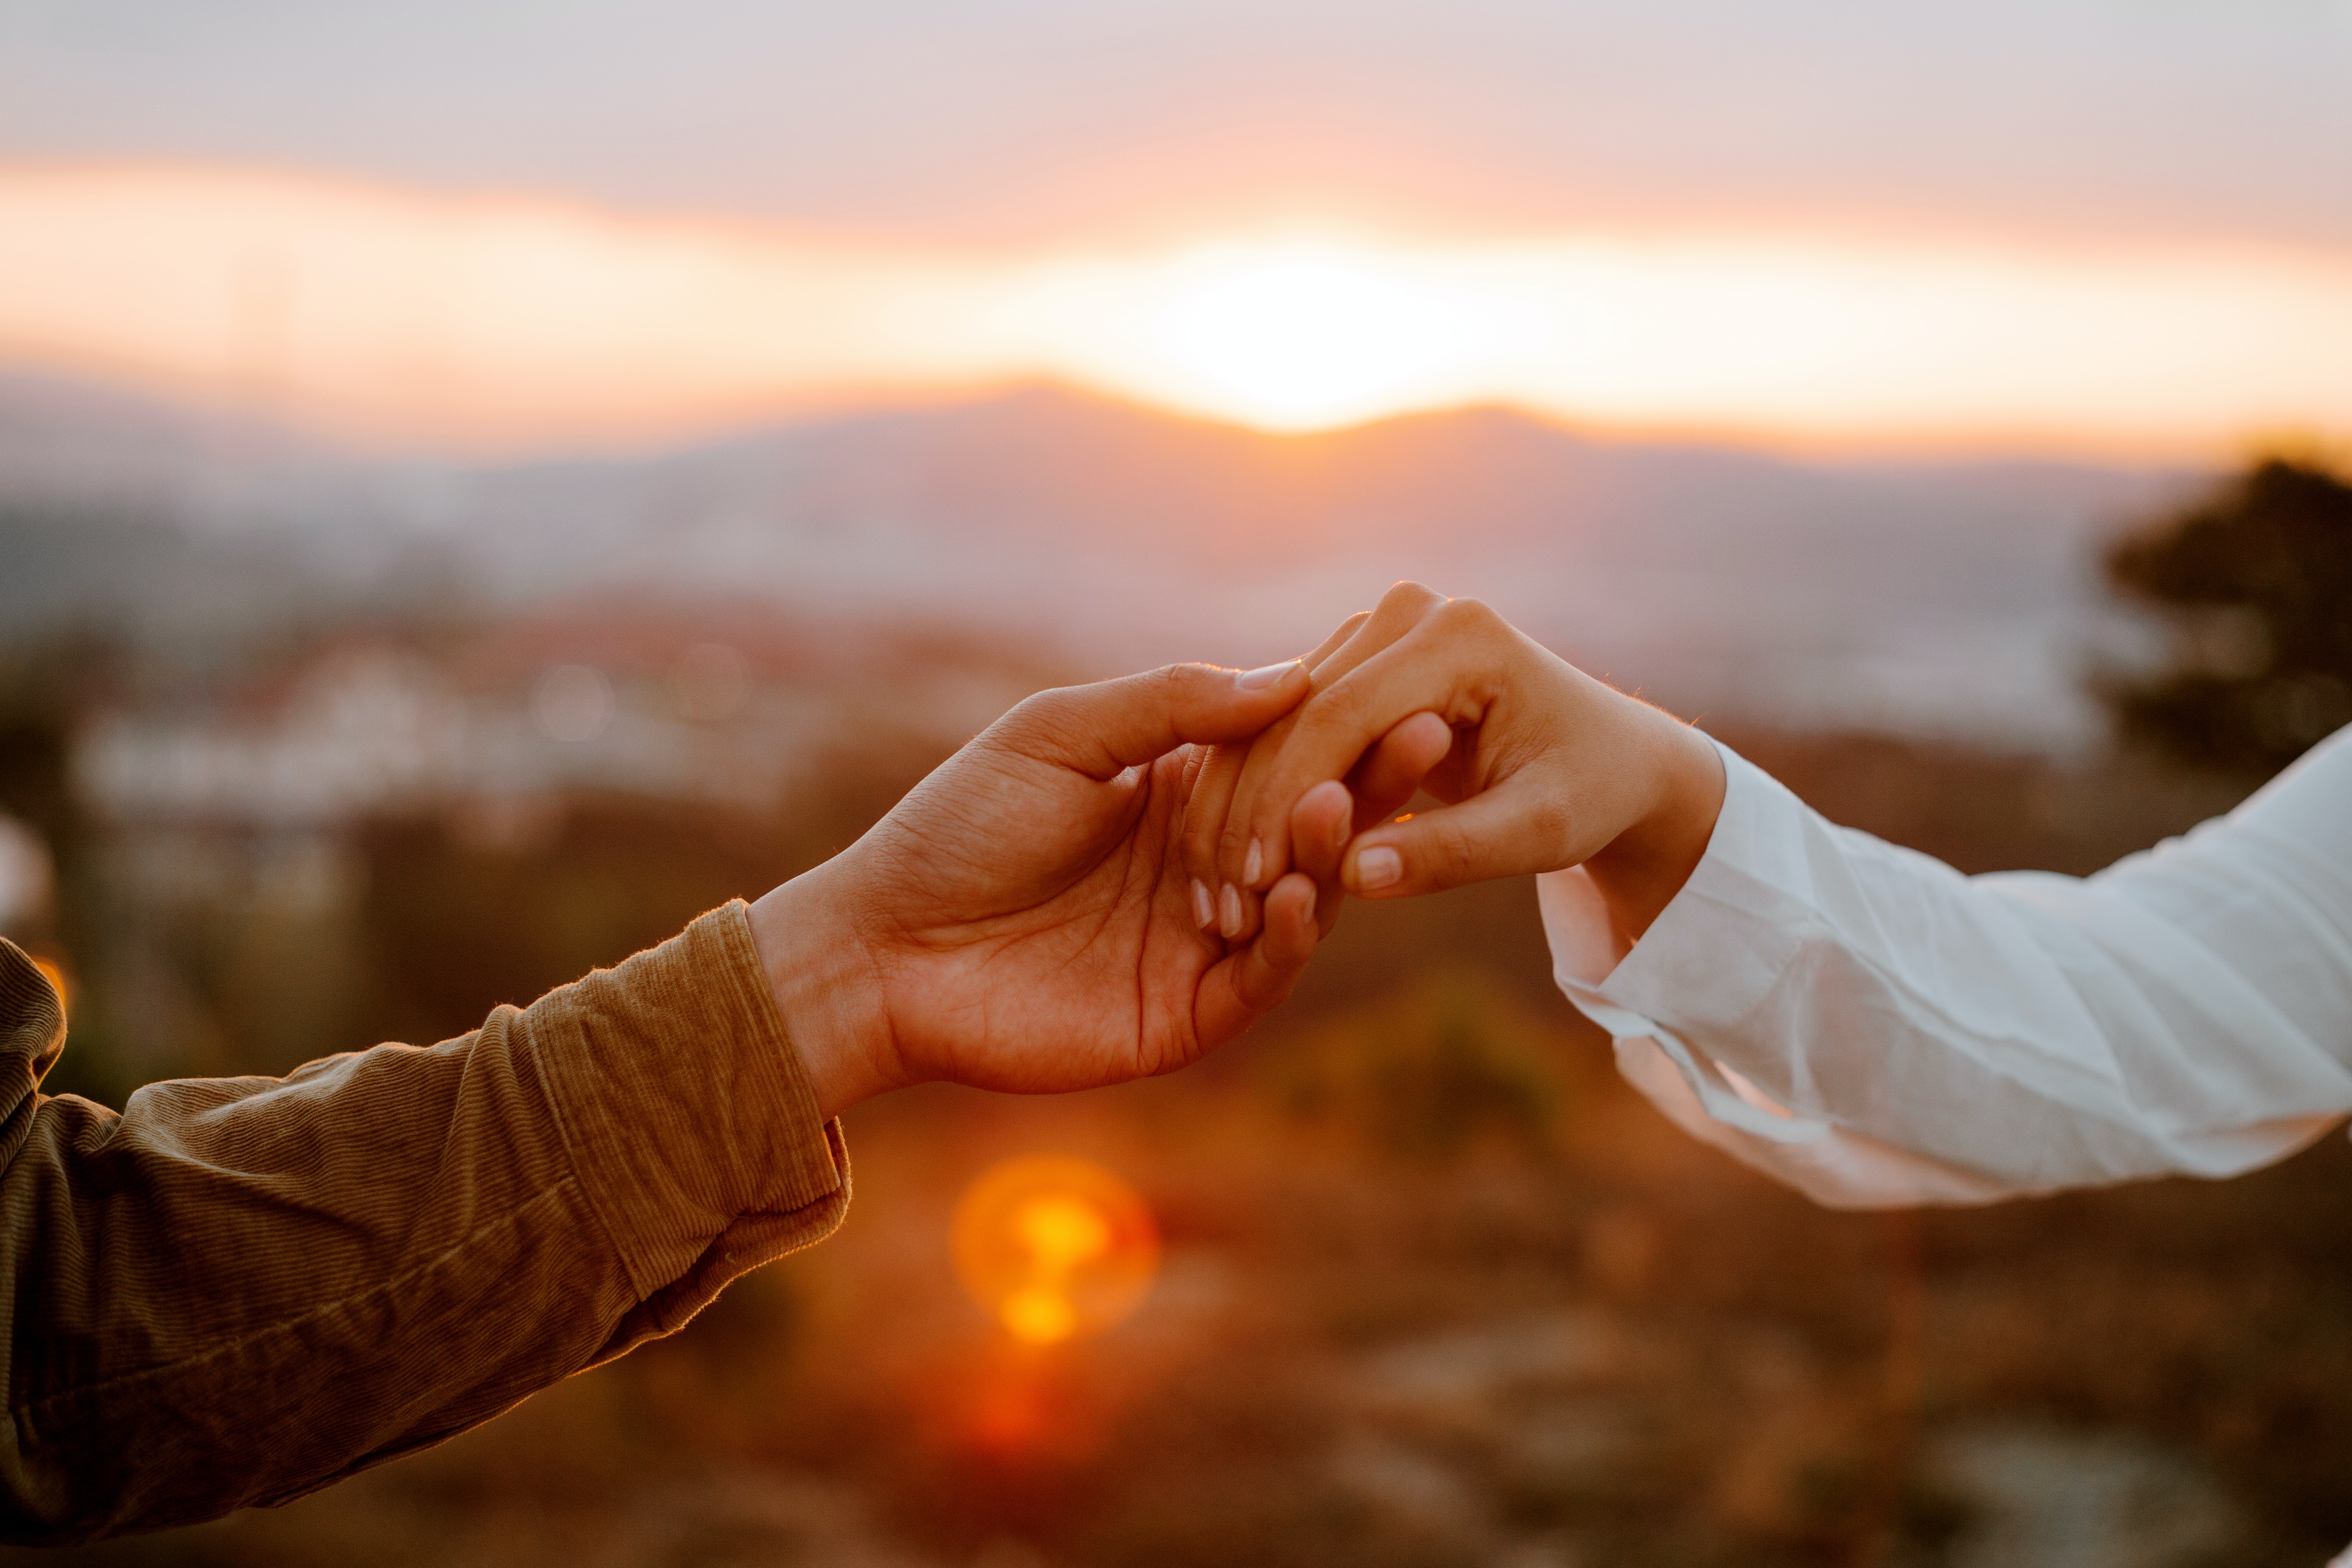 Couple holding hands at sunset. | Source: Pexels